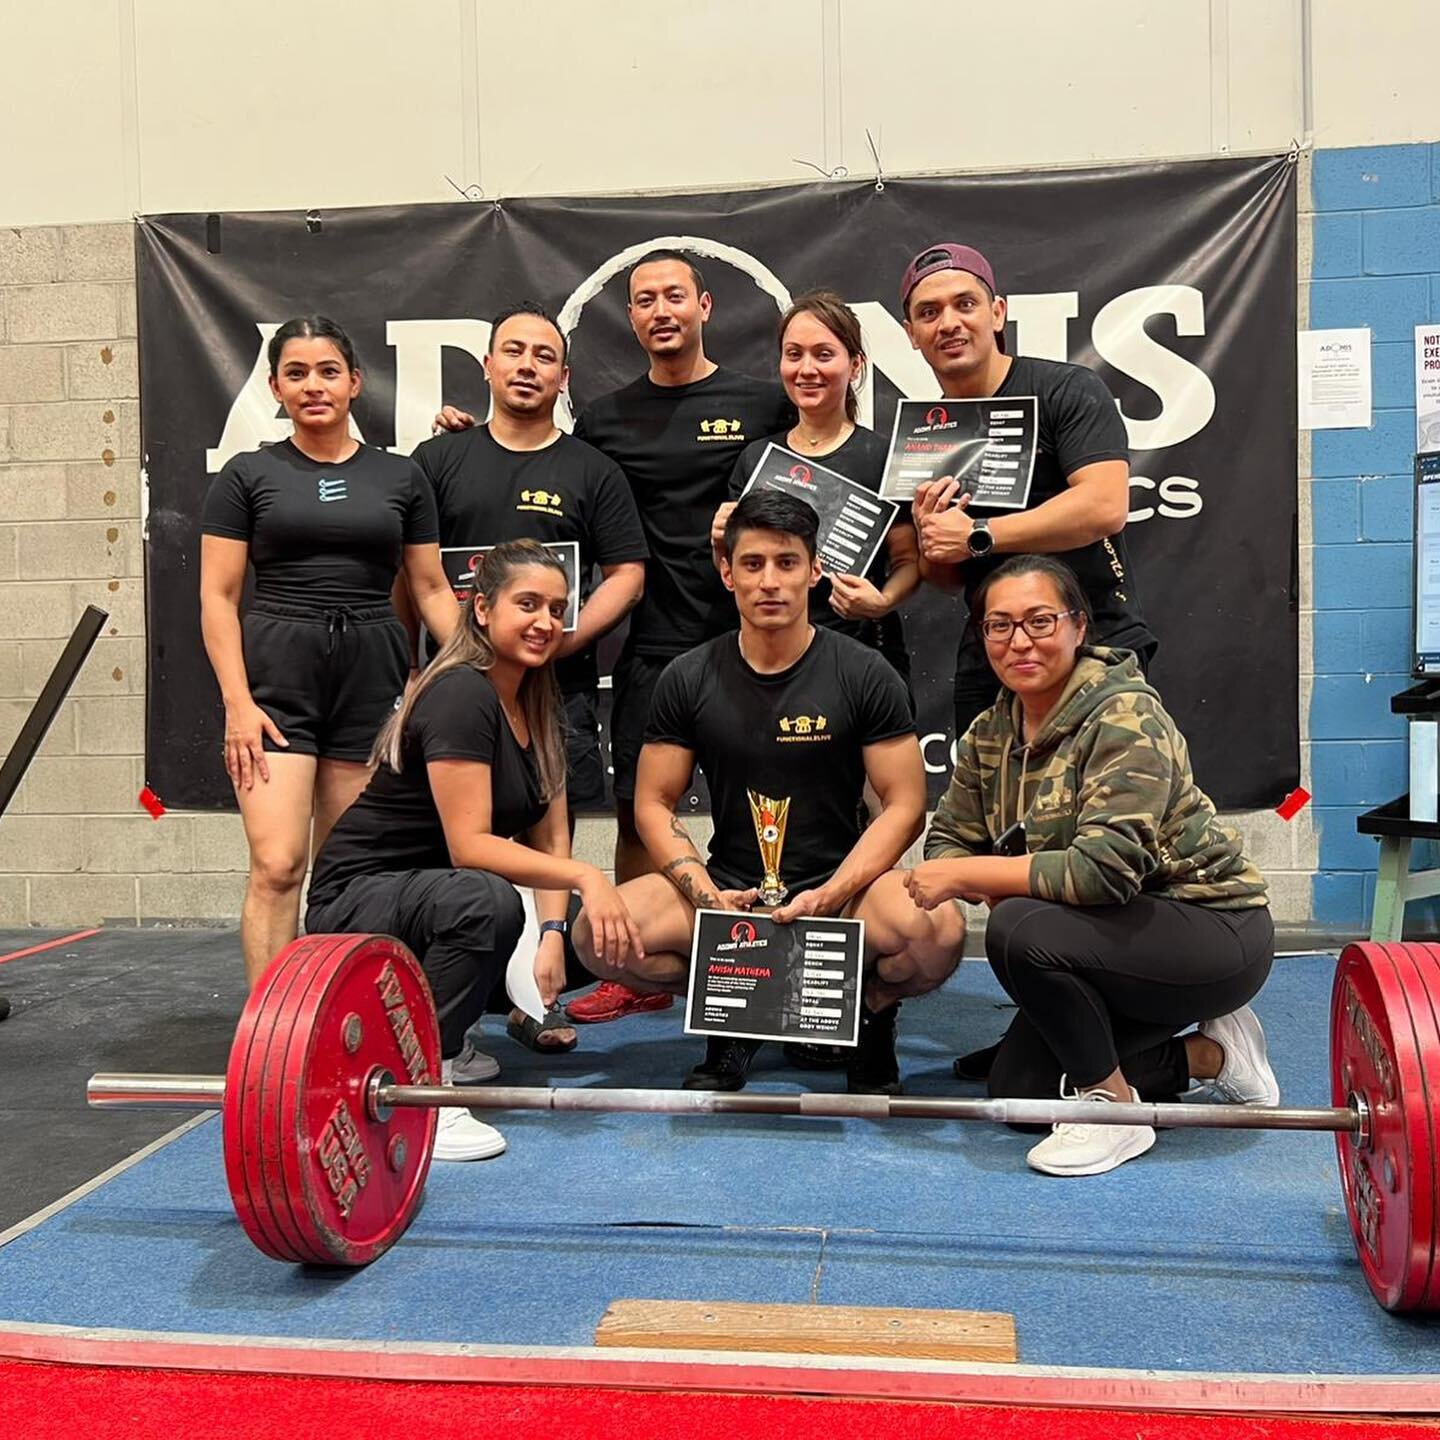 We are so proud of our F2L strength crew who participated in Novice powerlifting comp @adonisathleticscastlehill last weekend and gave their best performance. 🏆🙌🙌👏👏👏
@madhya100 
#functional2live #becomeabetterversionofyou #12regentstreetkogarah